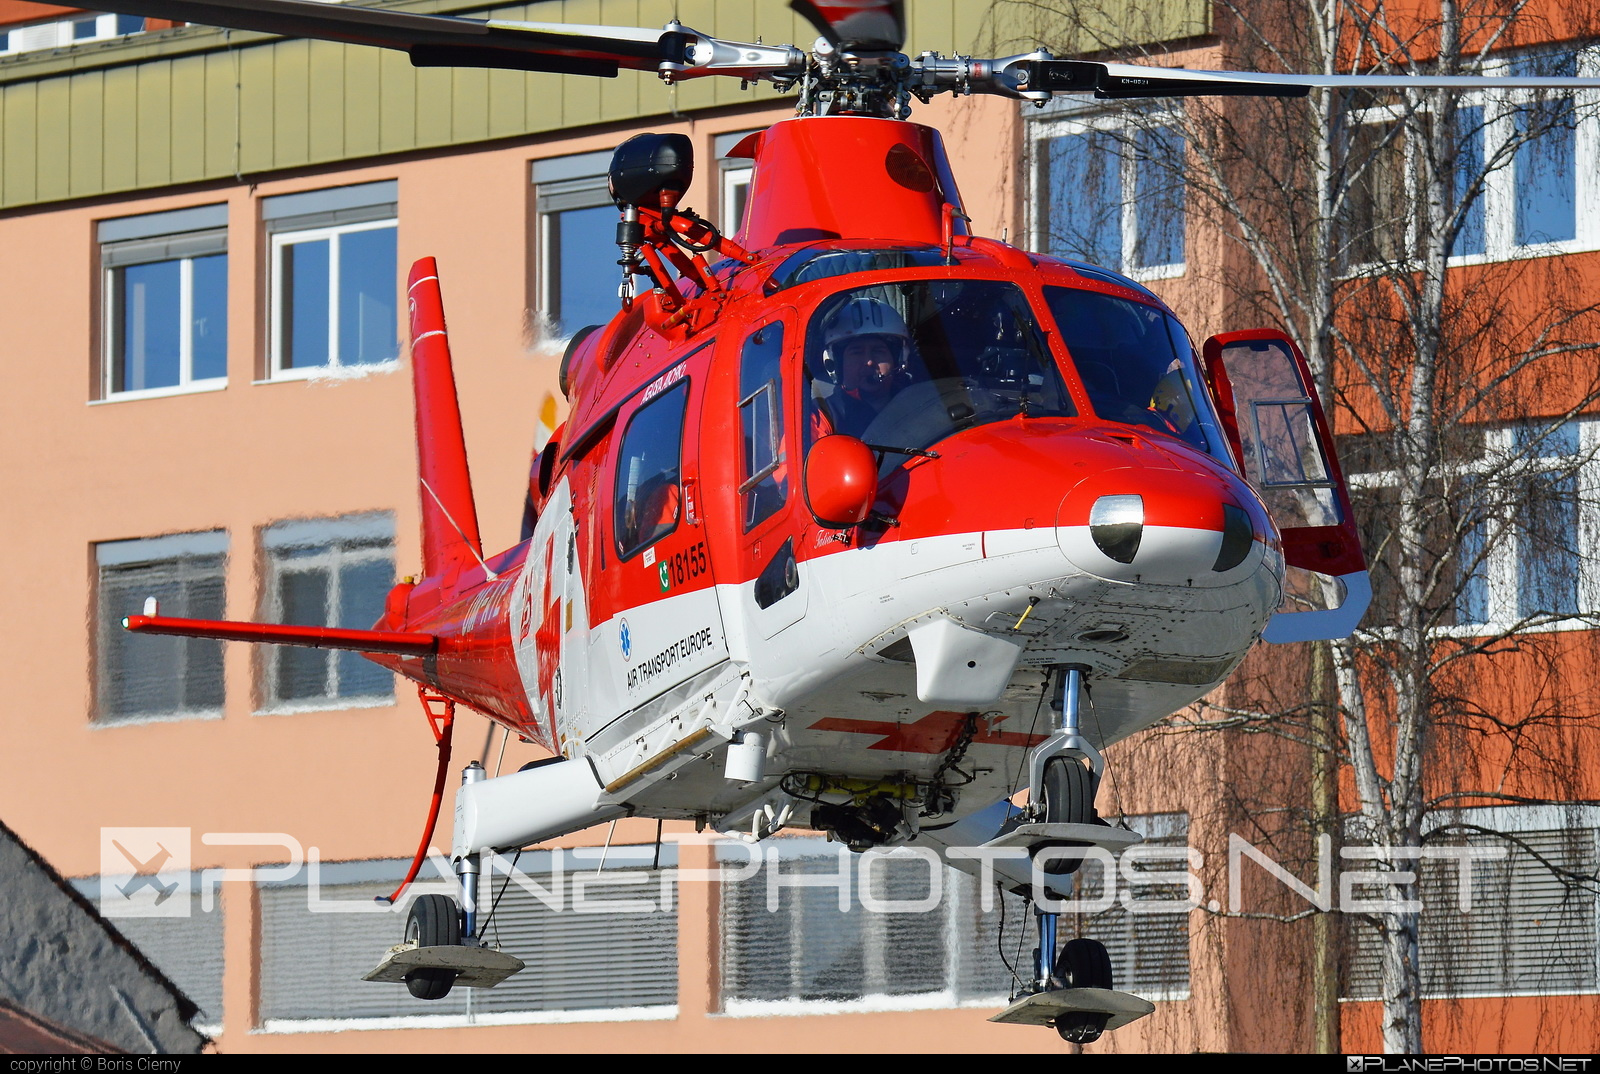 Agusta A109K2 - OM-ATE operated by Air Transport Europe #a109 #a109k2 #agusta #agusta109 #agustaa109 #agustaa109k2 #airtransporteurope